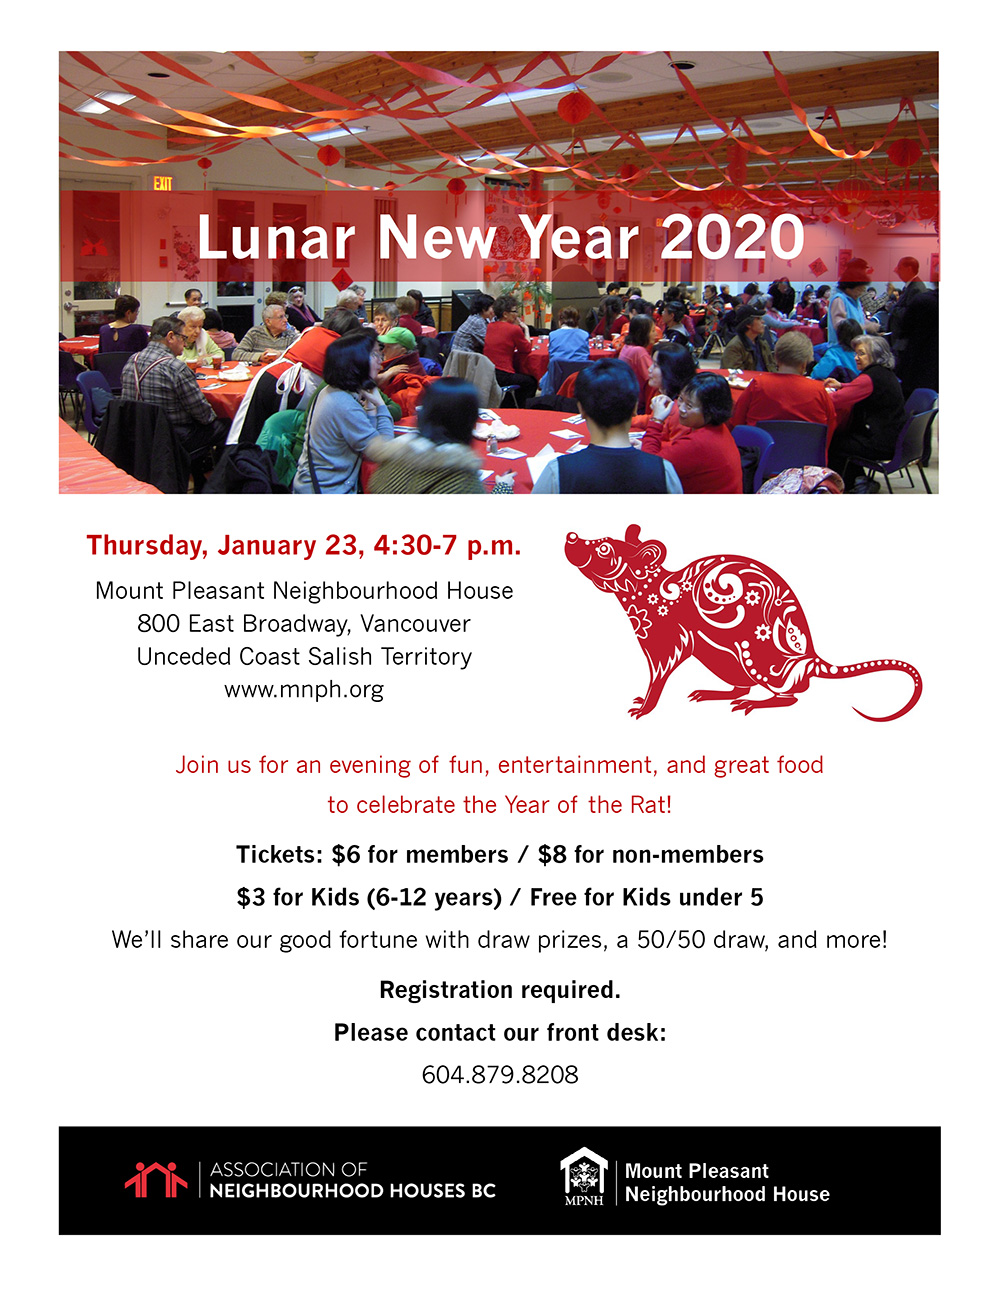 Poster for the Lunar New Year 2020 celebration showing people enjoying dinner surrounded by red decorations